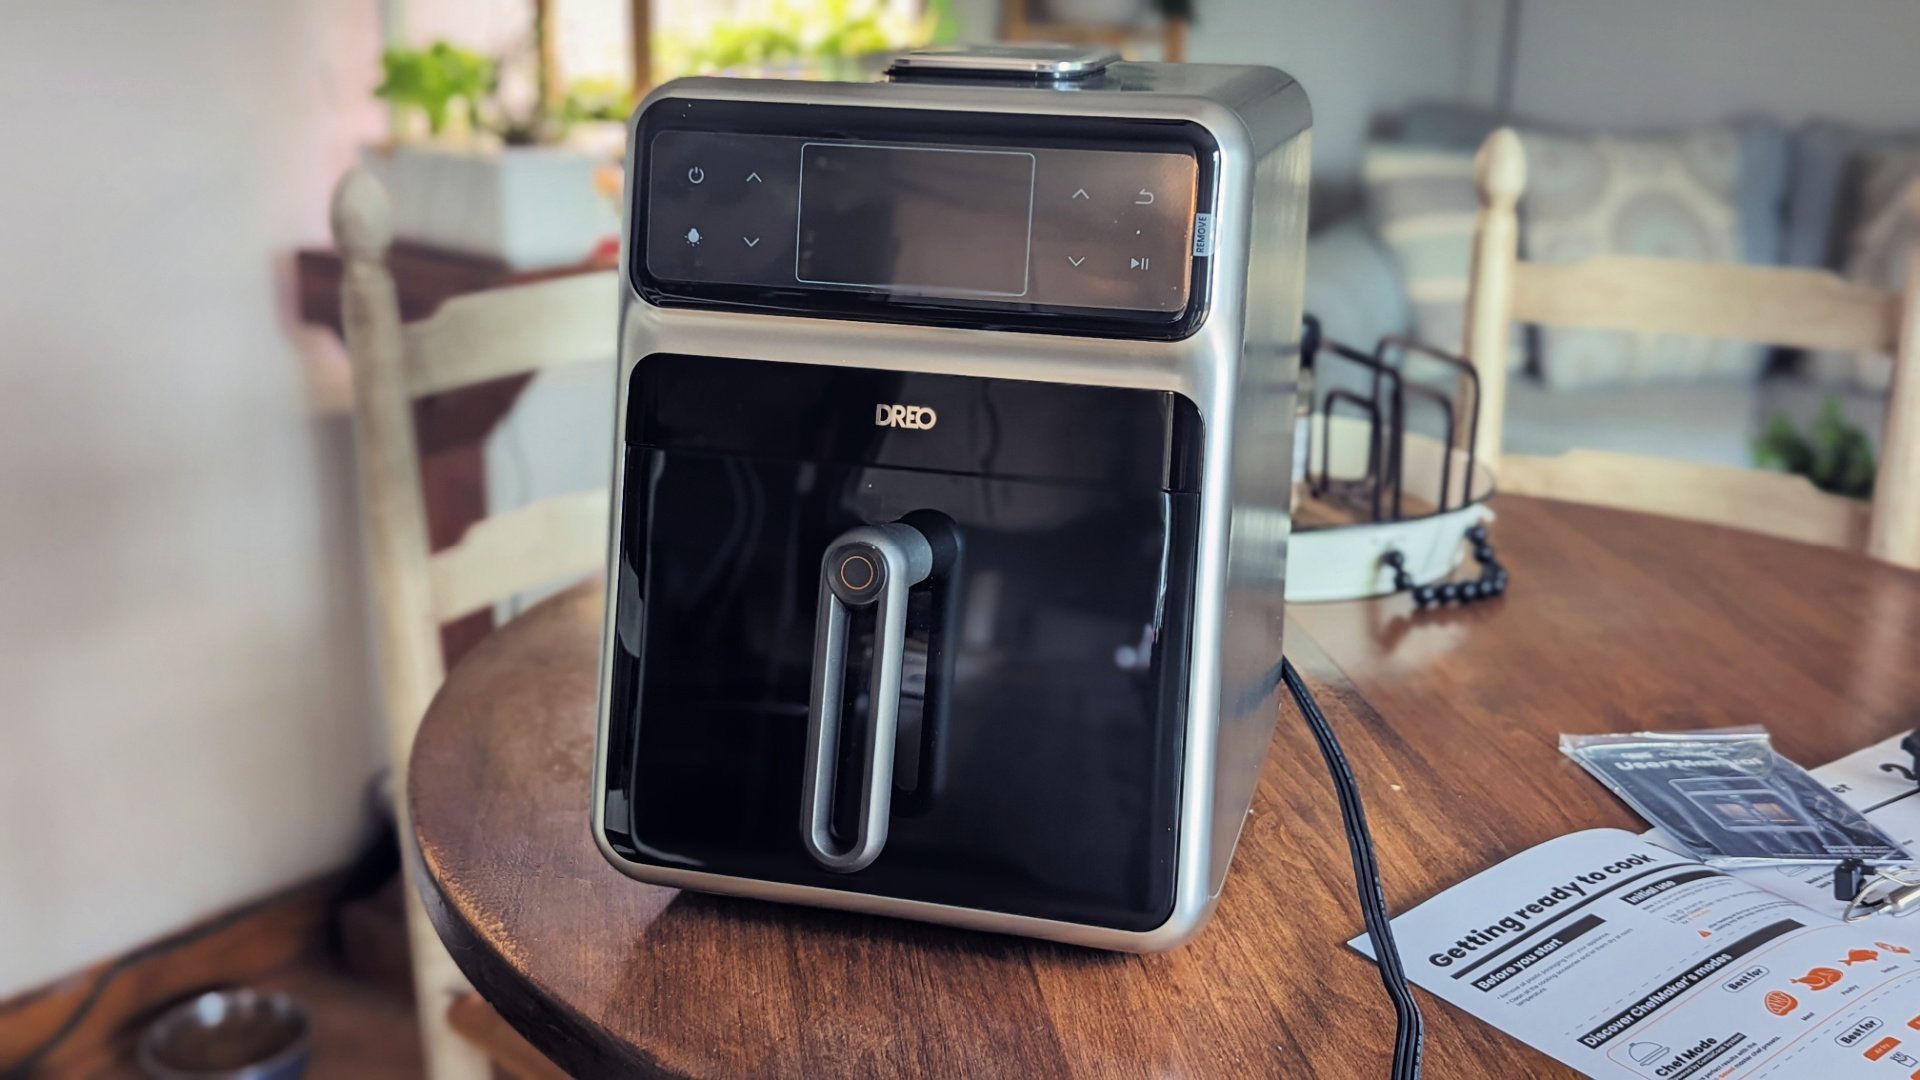  Dreo ChefMaker Combi Fryer, Cook like a pro with just